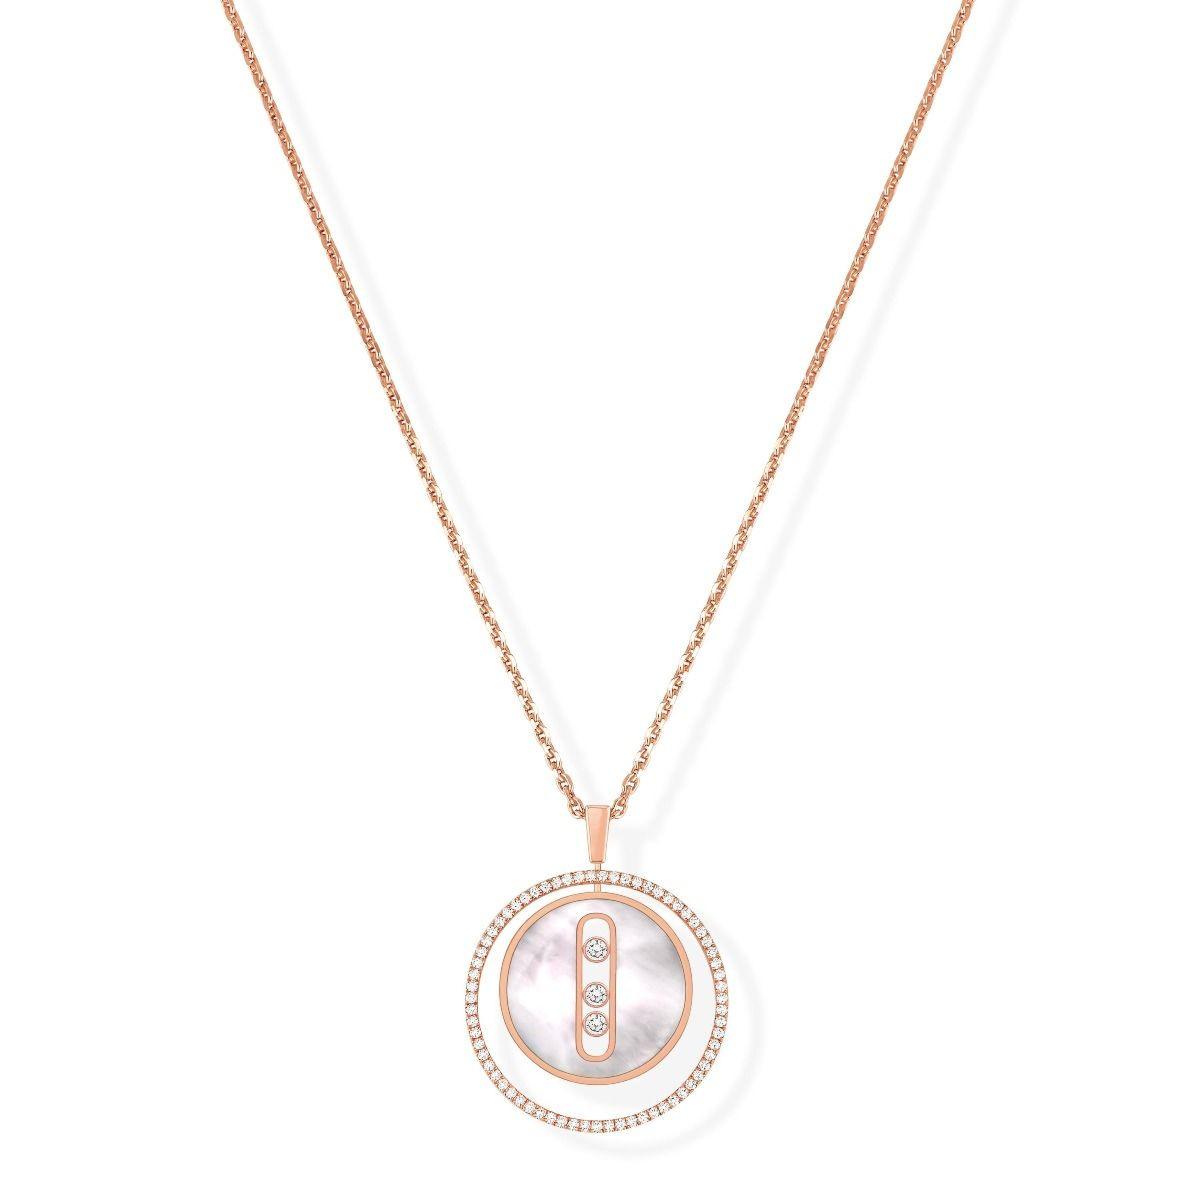 Colour Blossom Xl Medallion, Pink Gold, White Mother-Of-Pearl and Diamond -  Categories Q93656